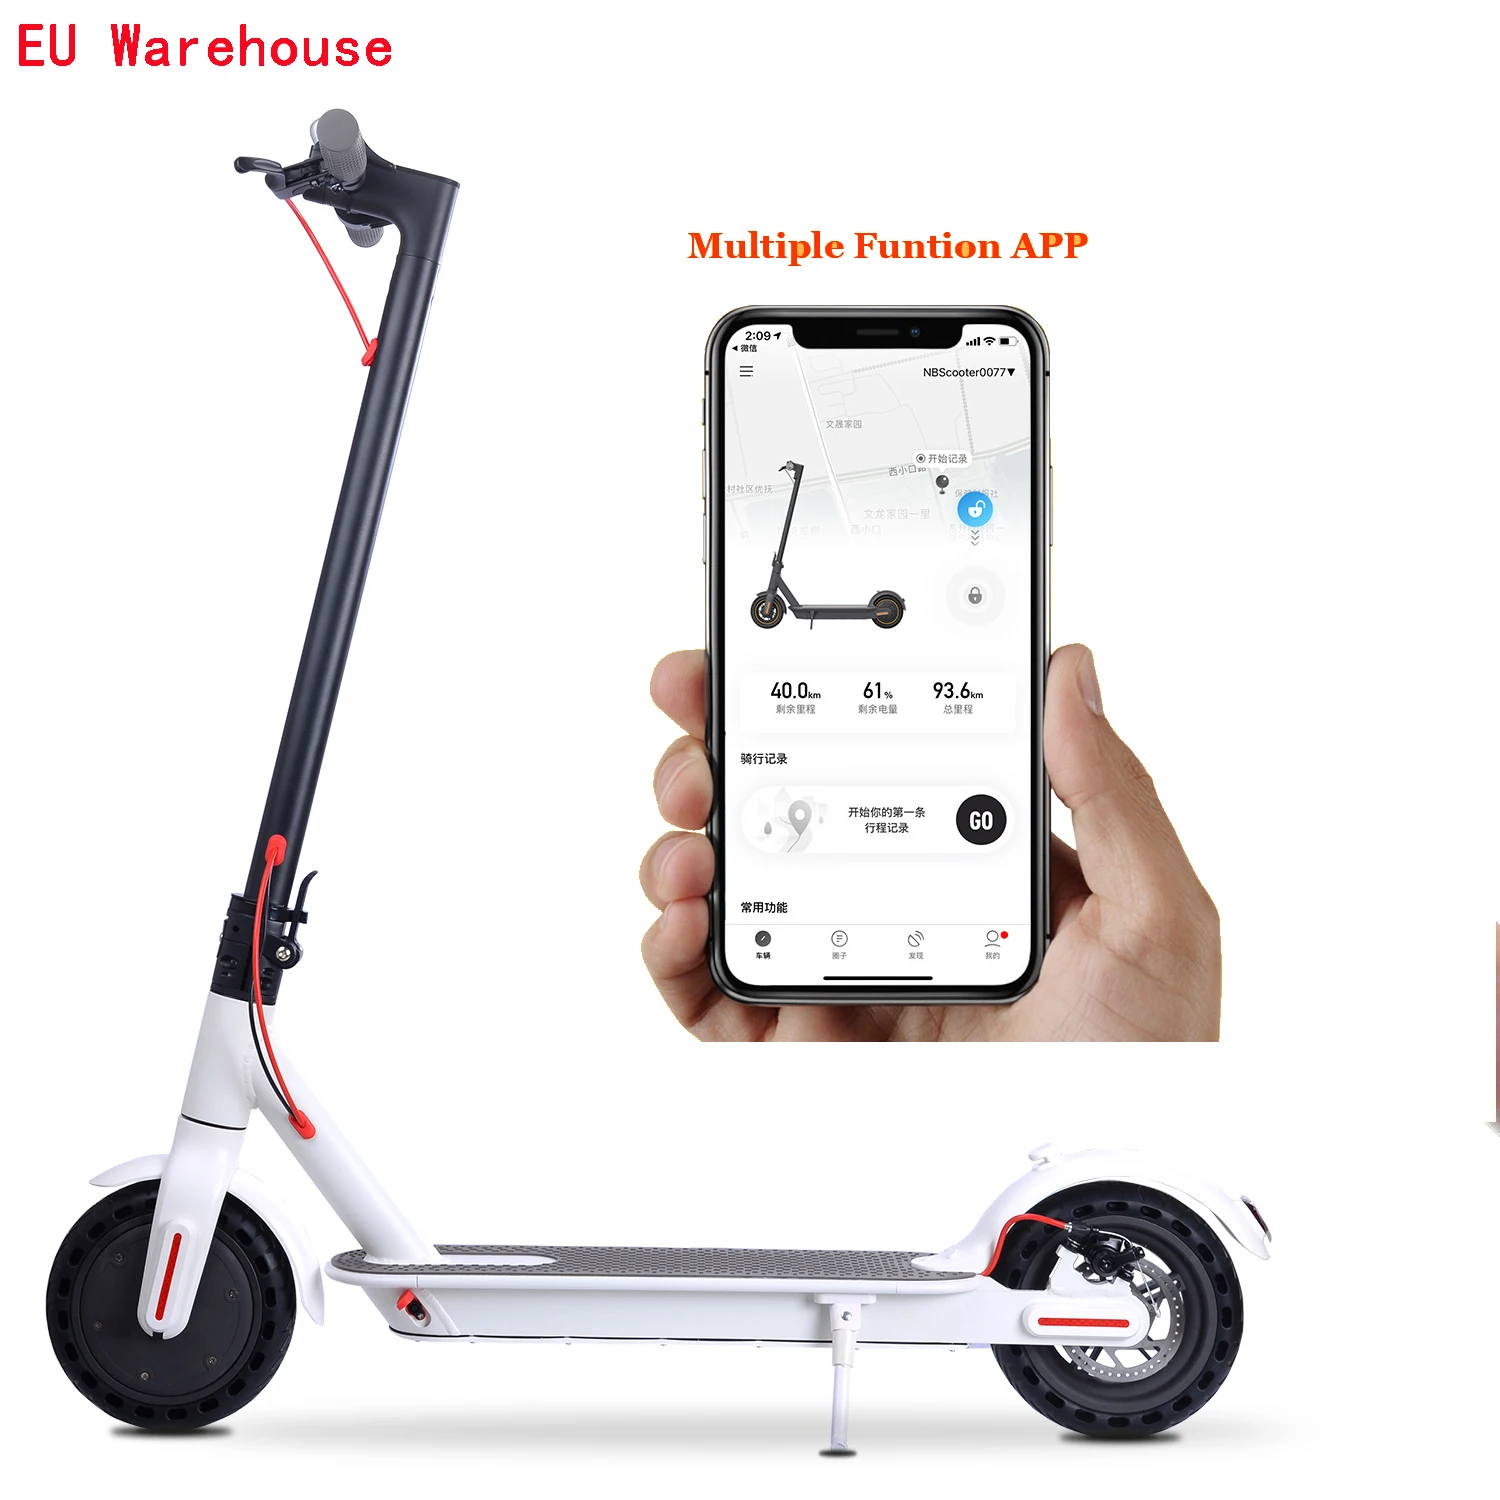 

EU warehouse 2020 new type M365 pro 350W motor 36V 7.8AH battery Low price 2wheels foldable electric scooter, White black